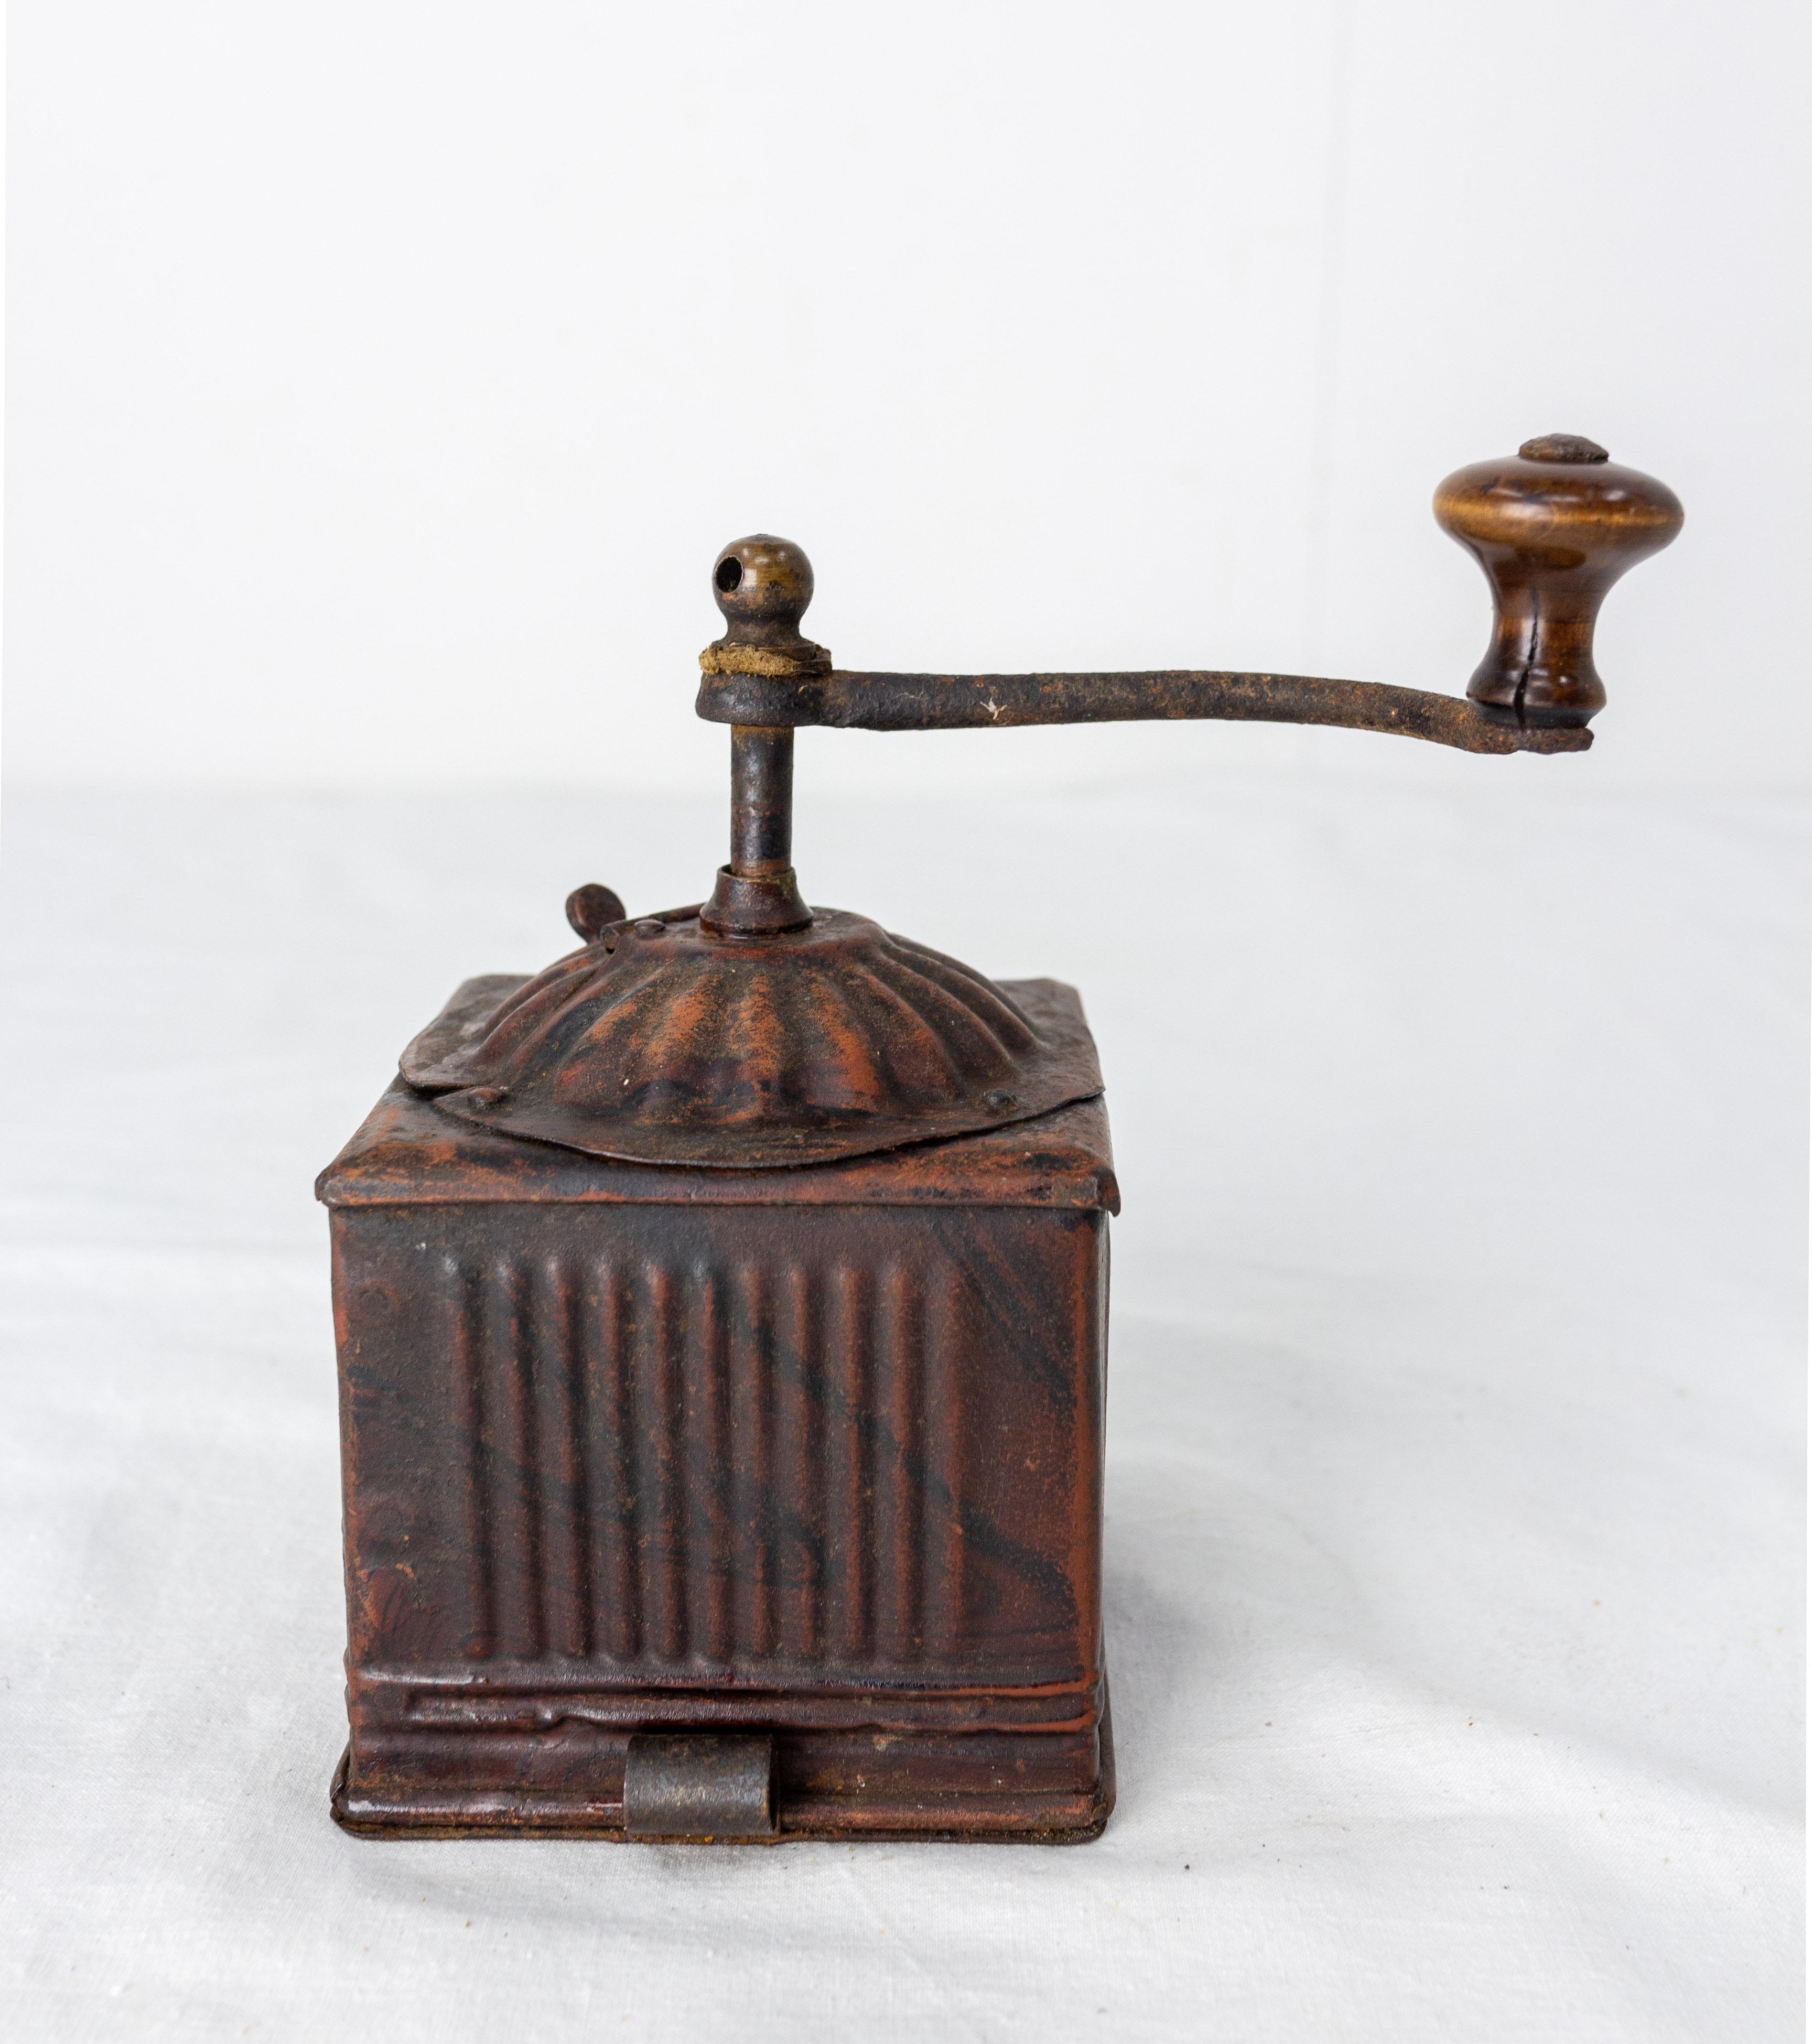 French little square peppermill or pepper grinder
Very atypical with its iron plate material, painted with an wood imitation
19th Century.
Good condition.

Shipping:
L 26 P12 H19 2,8 Kg.